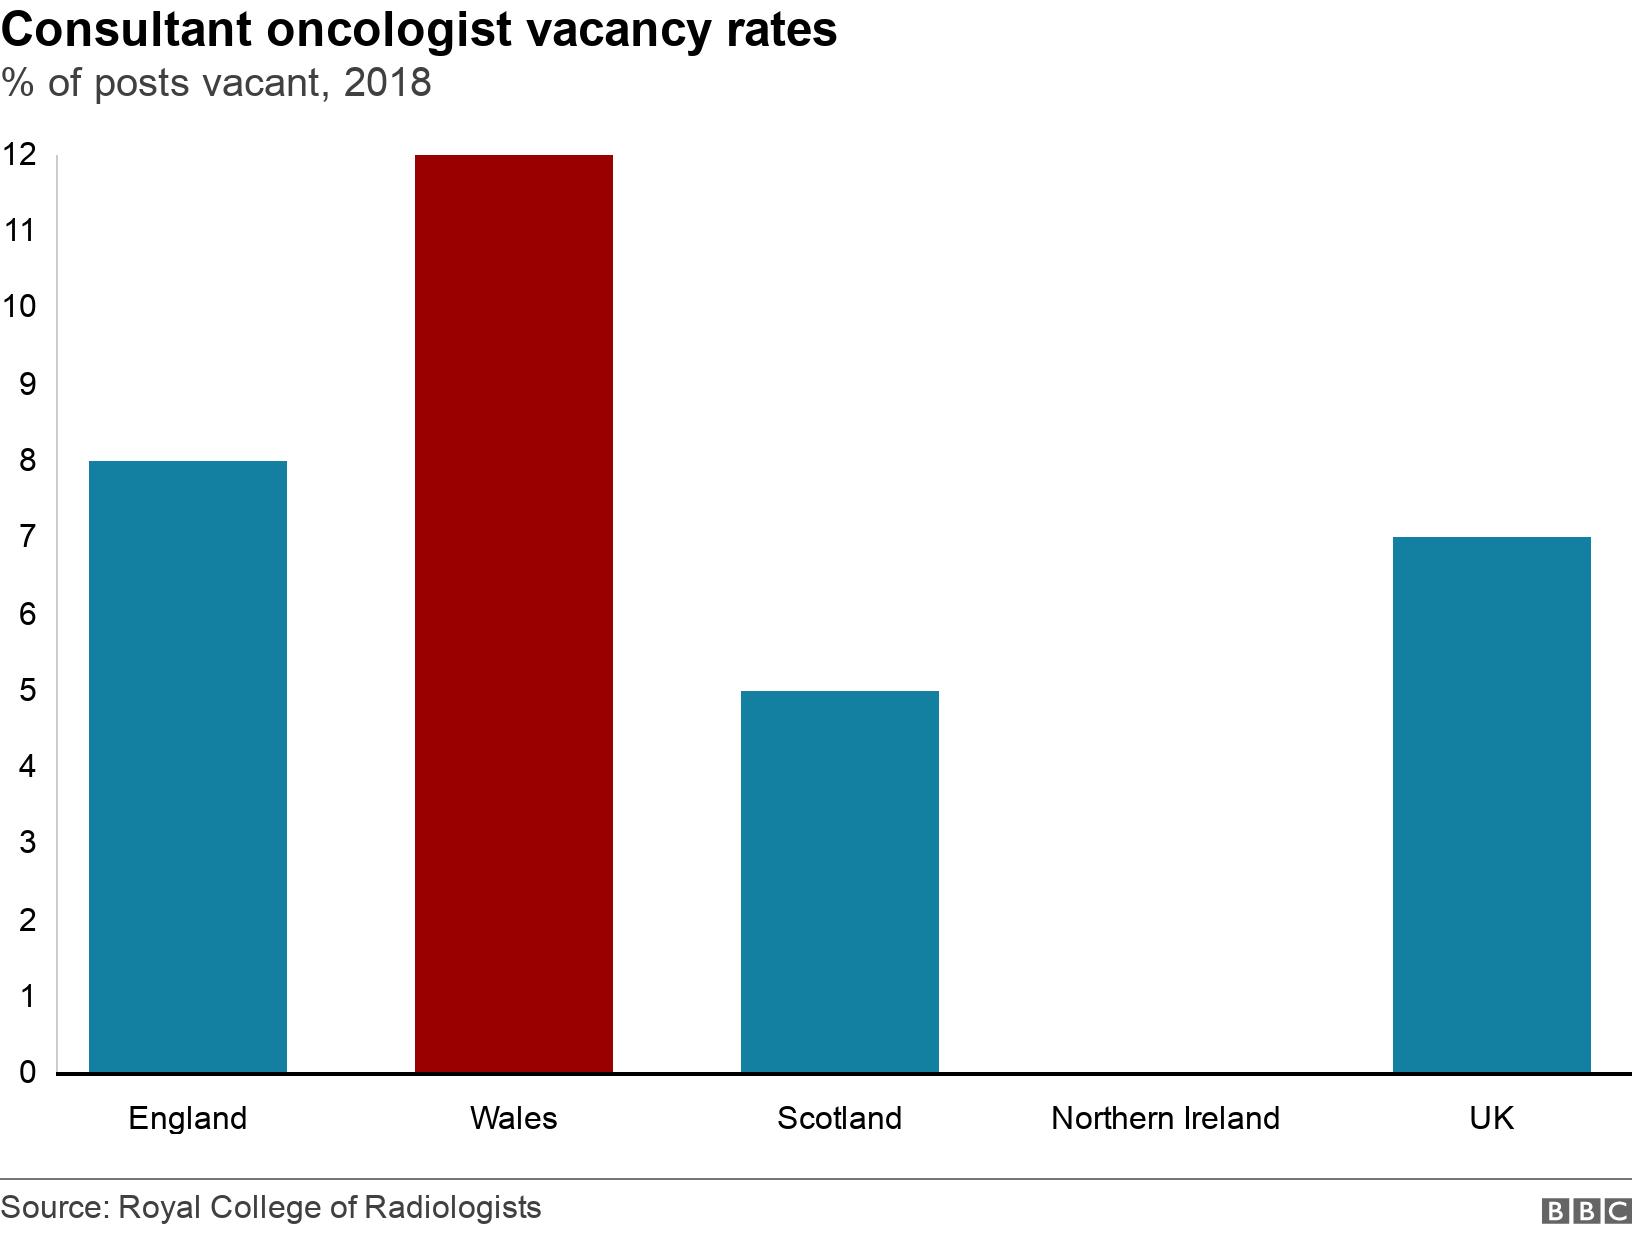 Consultant oncologist vacancy rates. % of posts vacant, 2018. Consultant oncologist vacancy rates in UK nations .